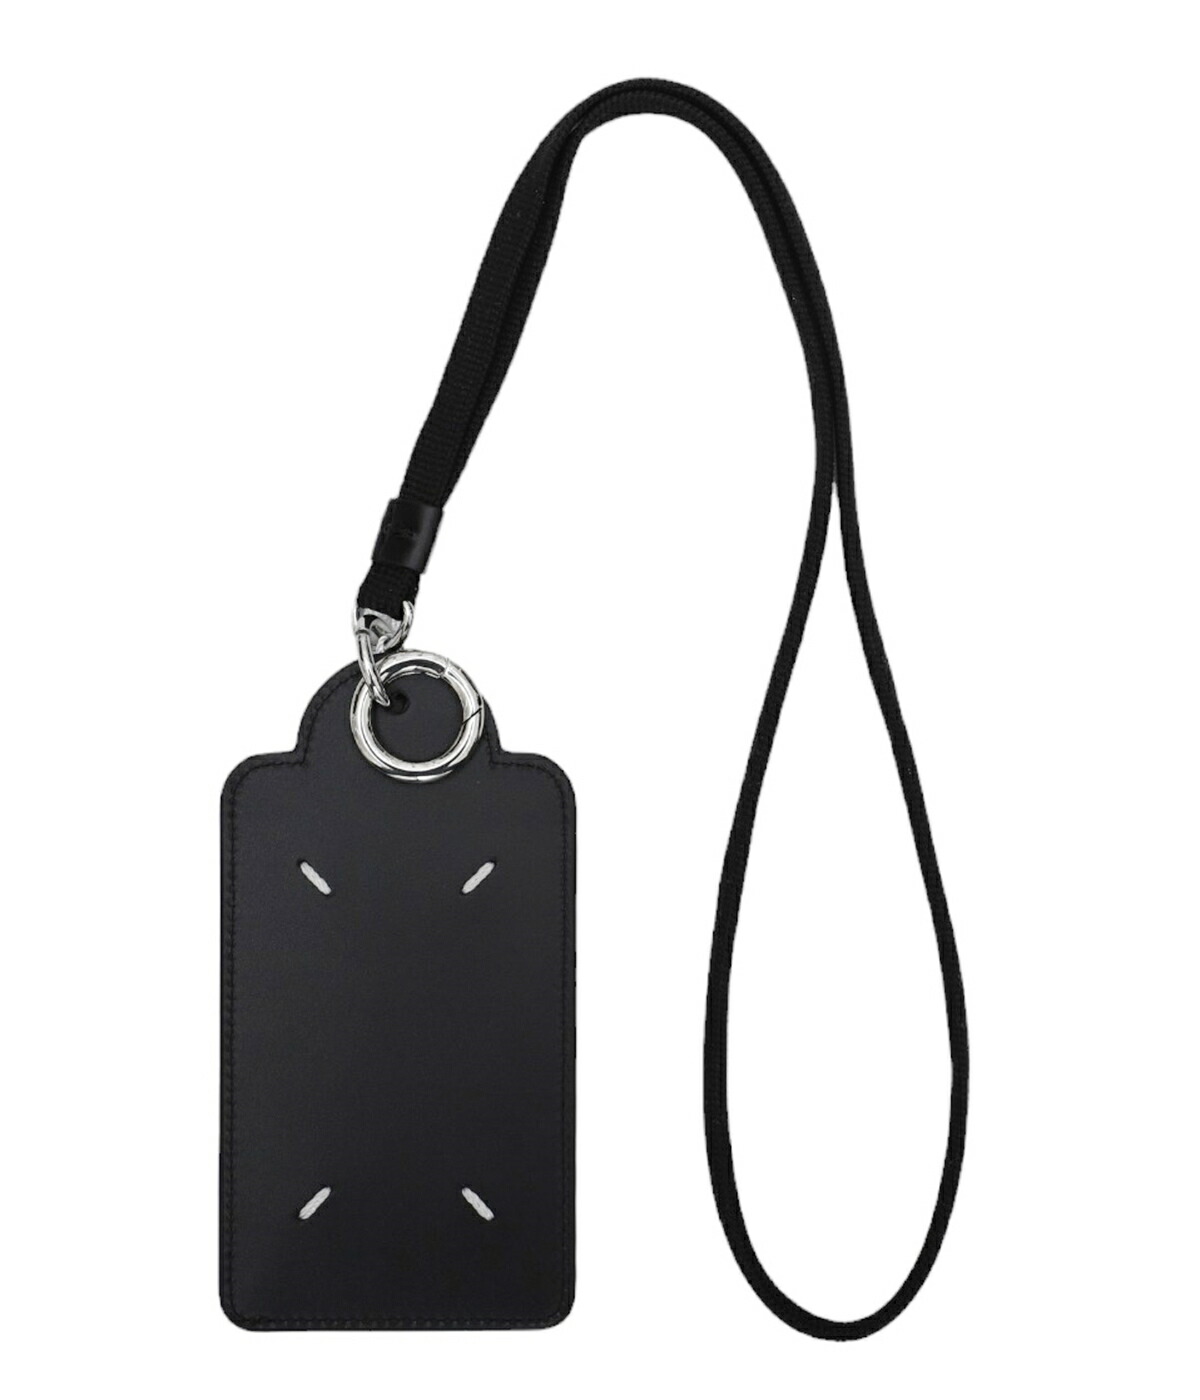 Maison Margiela / メゾン マルジェラ ： CARD HOLDER TAG WITH HOOK AND LACE ： SA1TZ0003-P5427｜arknets｜02